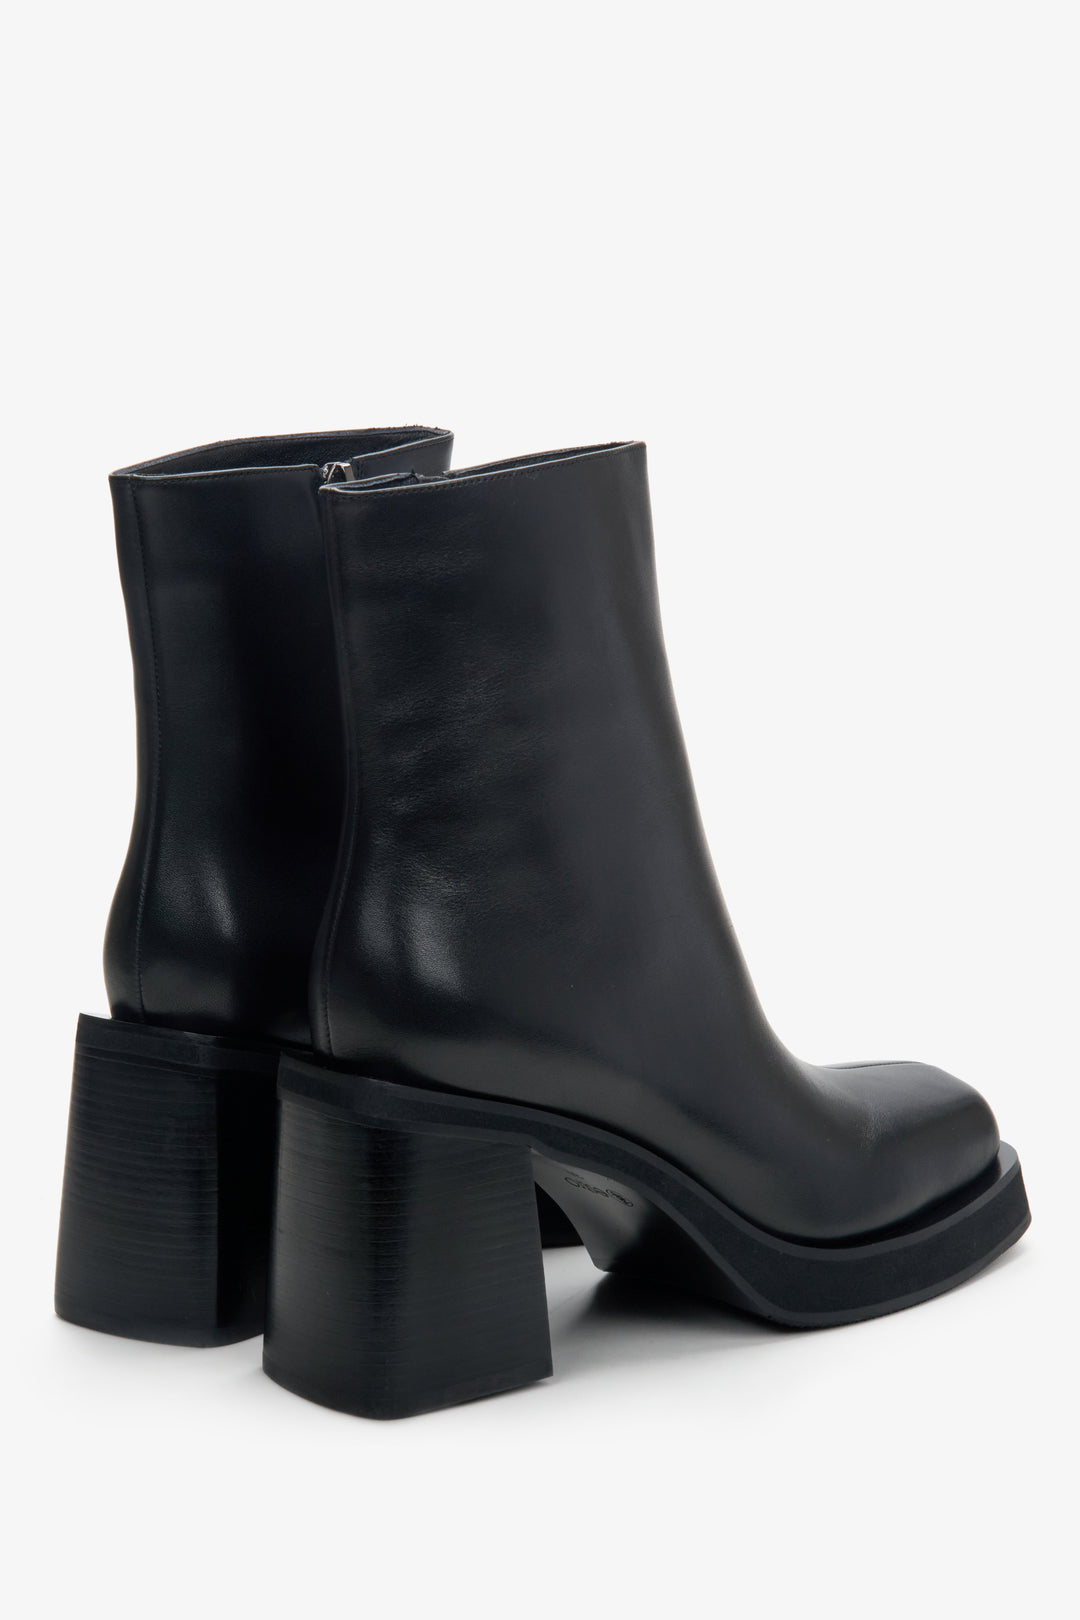 Women's black boots made of genuine leather by Estro - close-up on the heel.